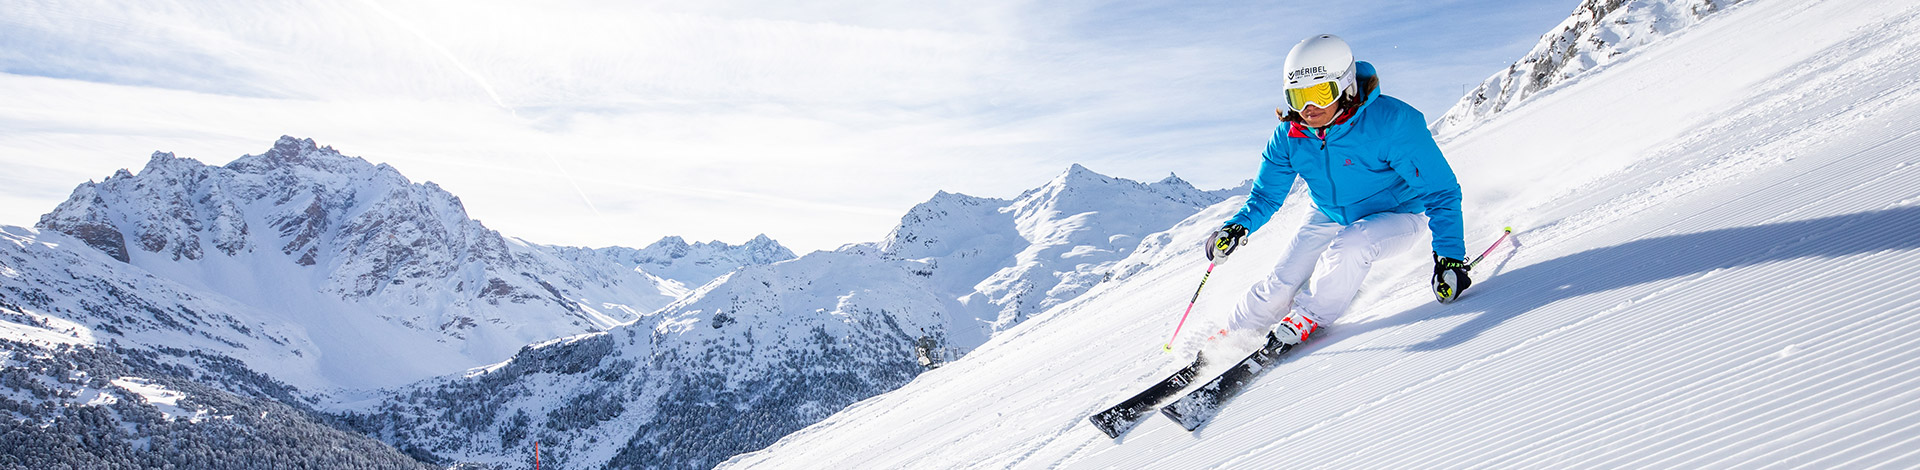 Enjoy great skiing in Les 3 Vallées with the unlimited season pass